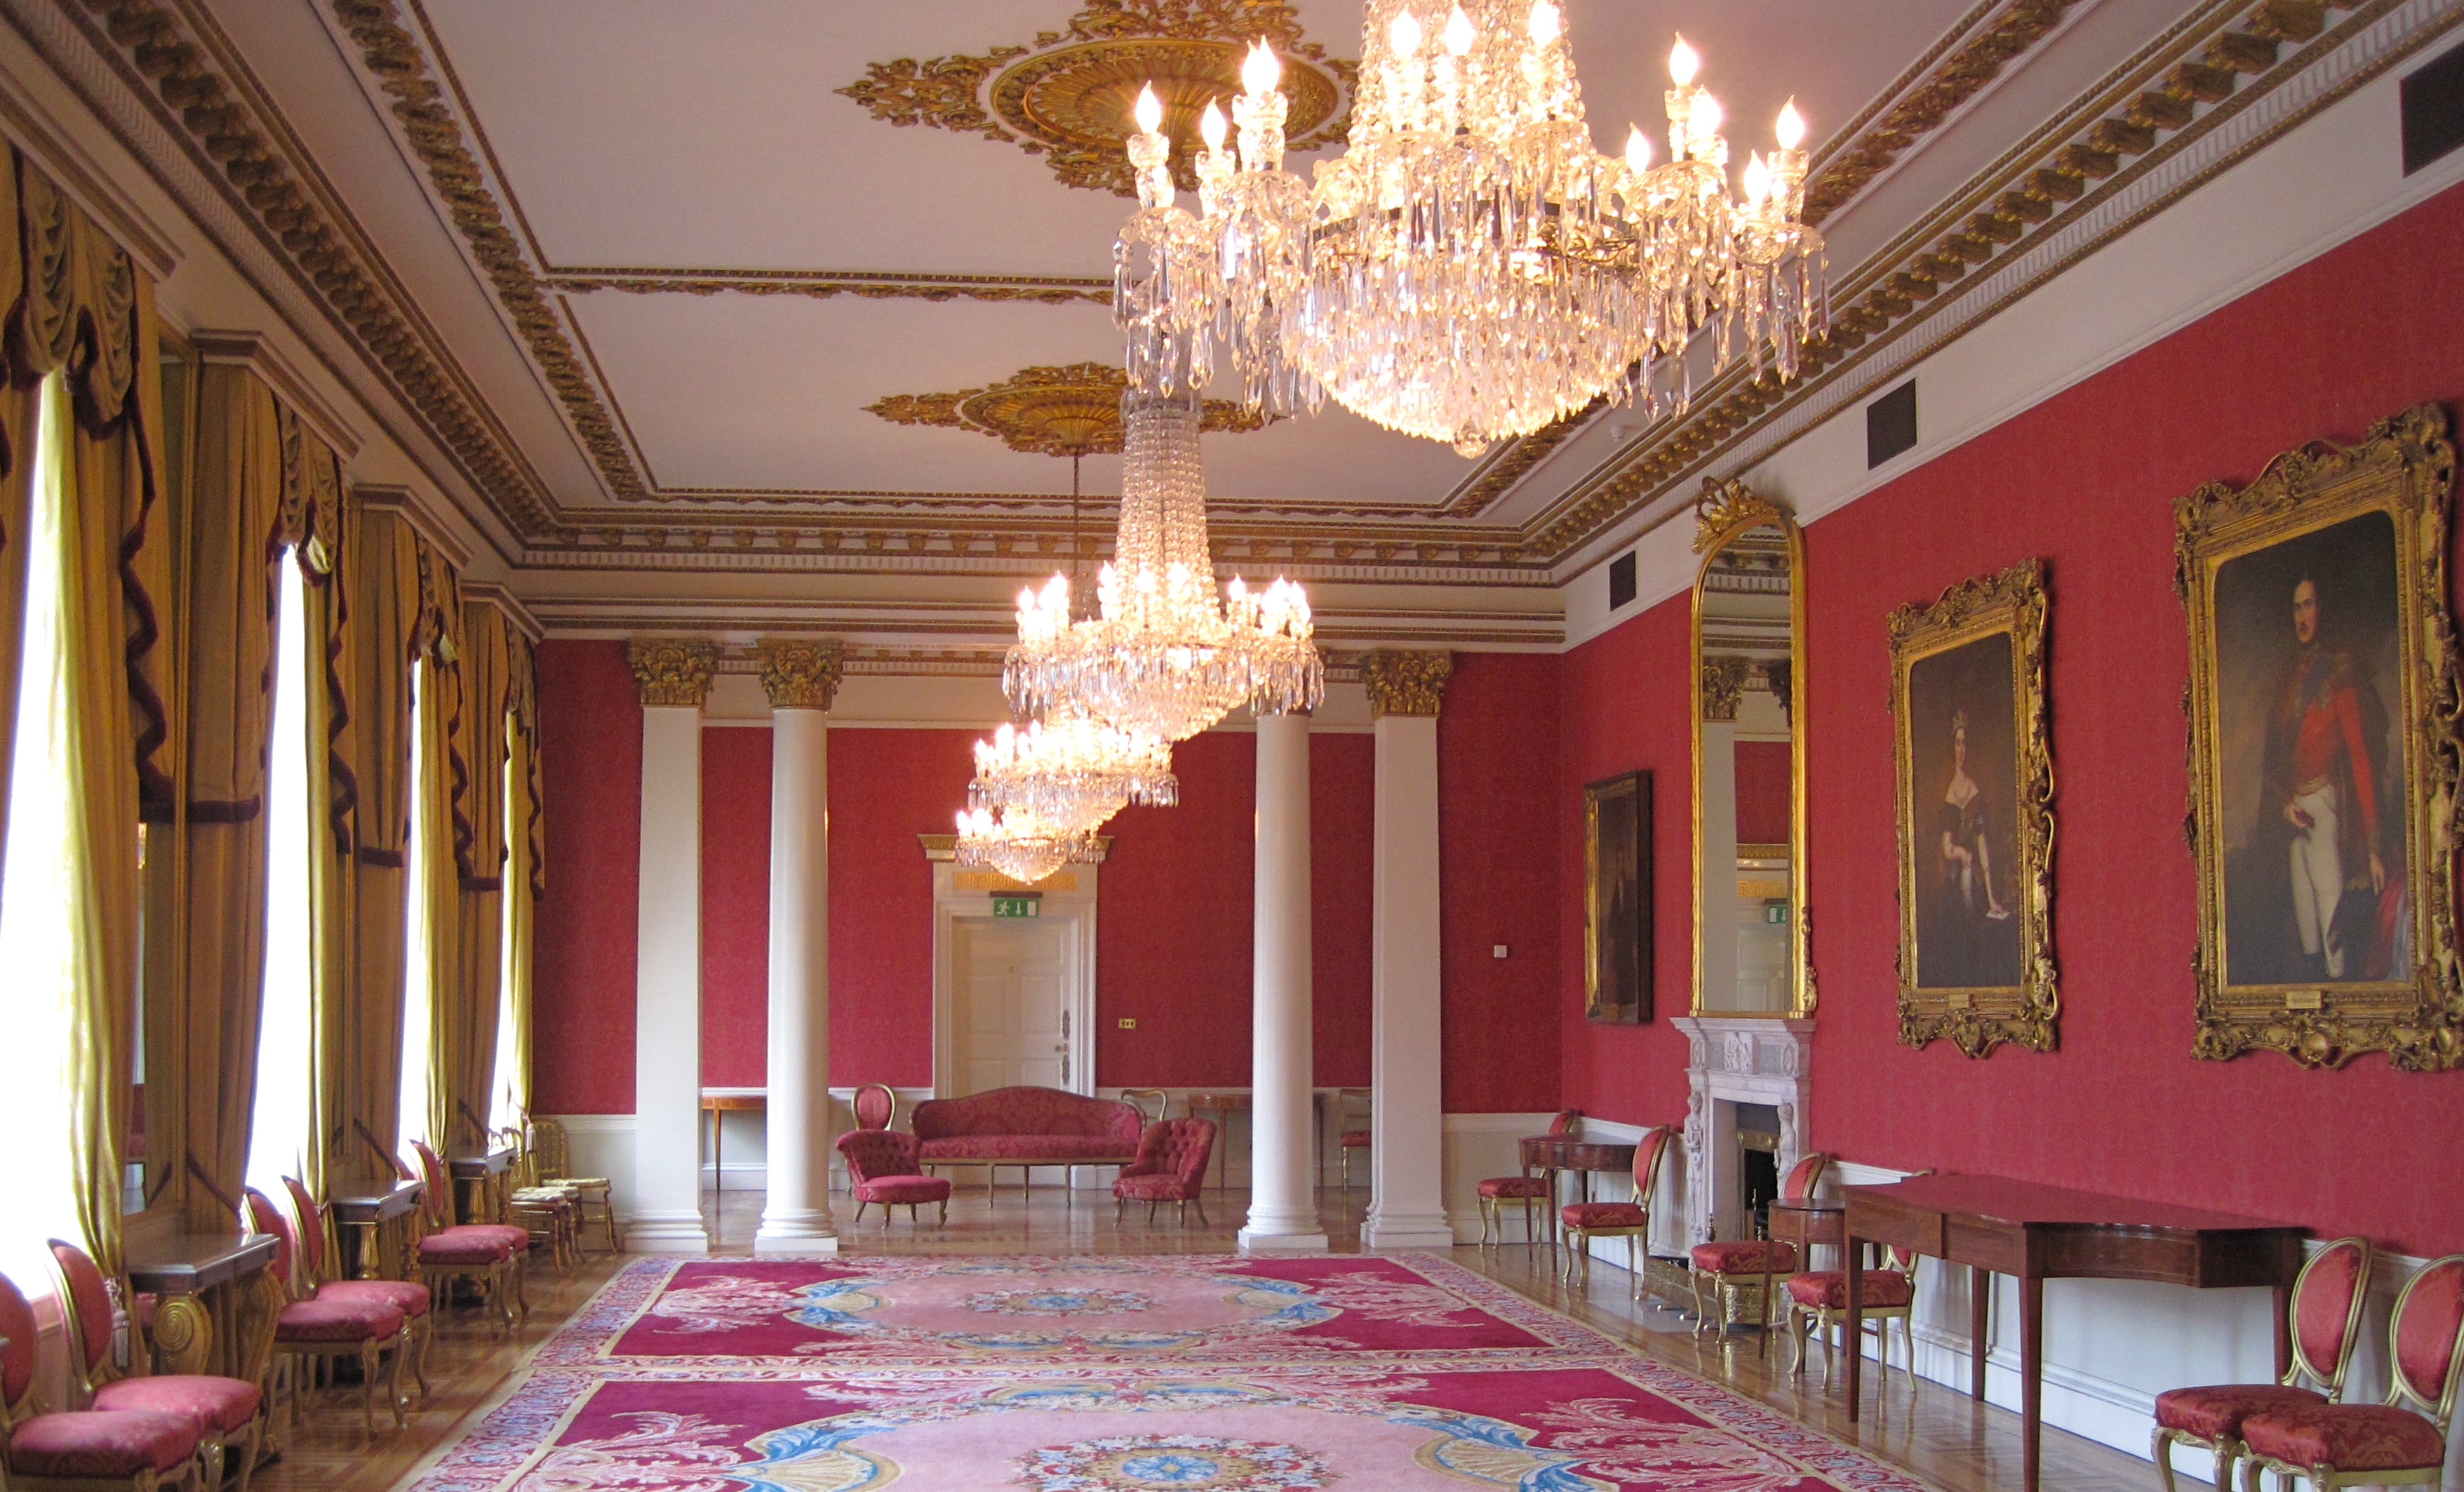 Woven carpets and Waterford crystal chandeliers at Dublin Castle. Photo by Marla Norman.